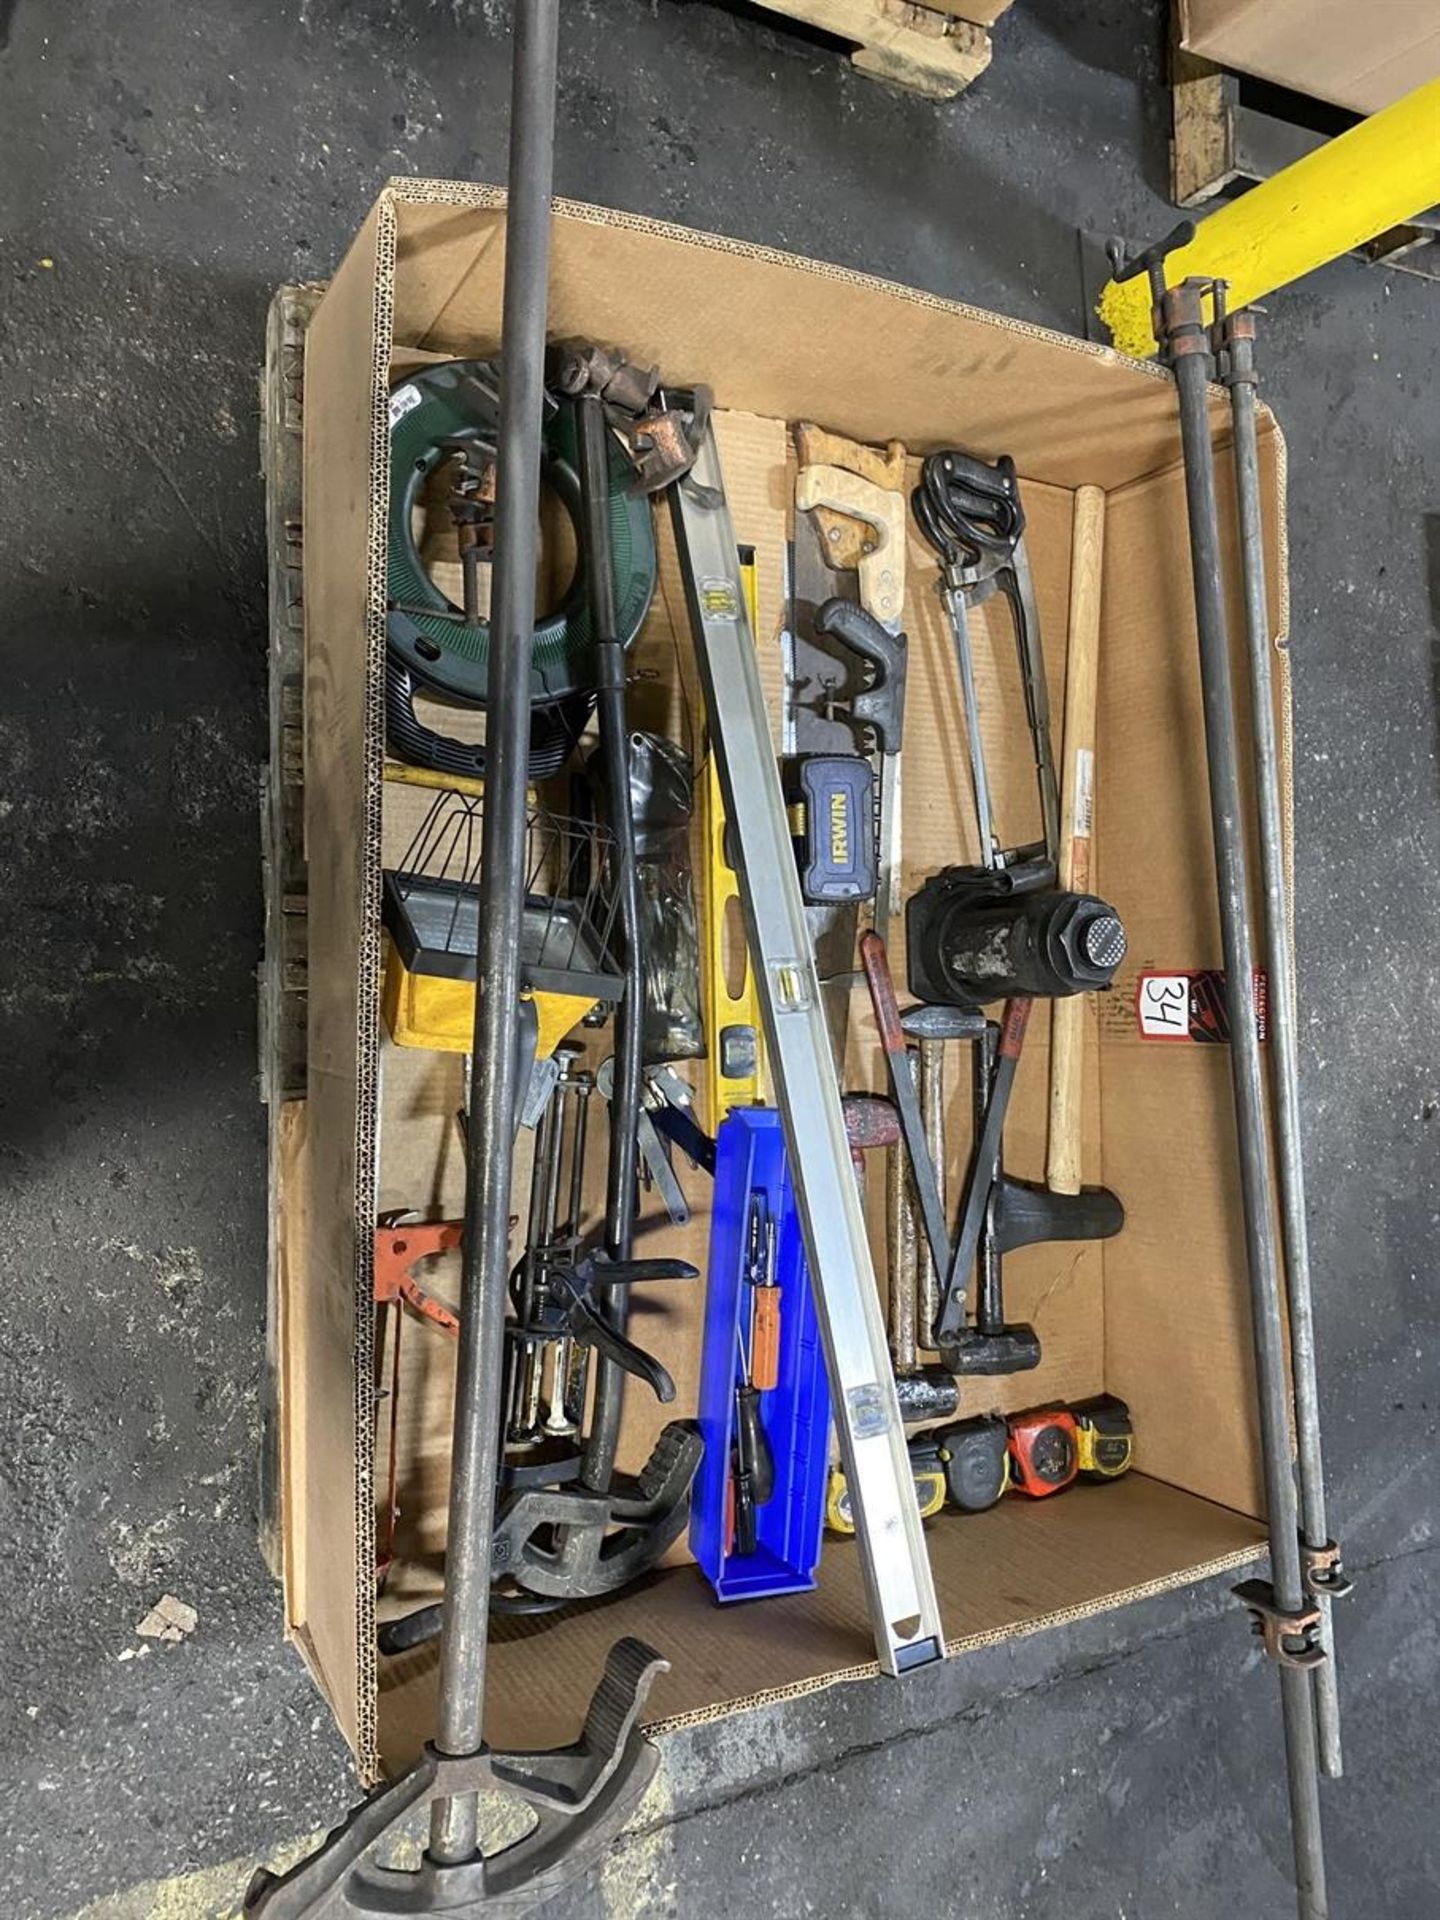 Lot of Assorted Tools Including Hand Riveters, Levels, Fish Tape, Saws, and Tape Measures - Image 2 of 4